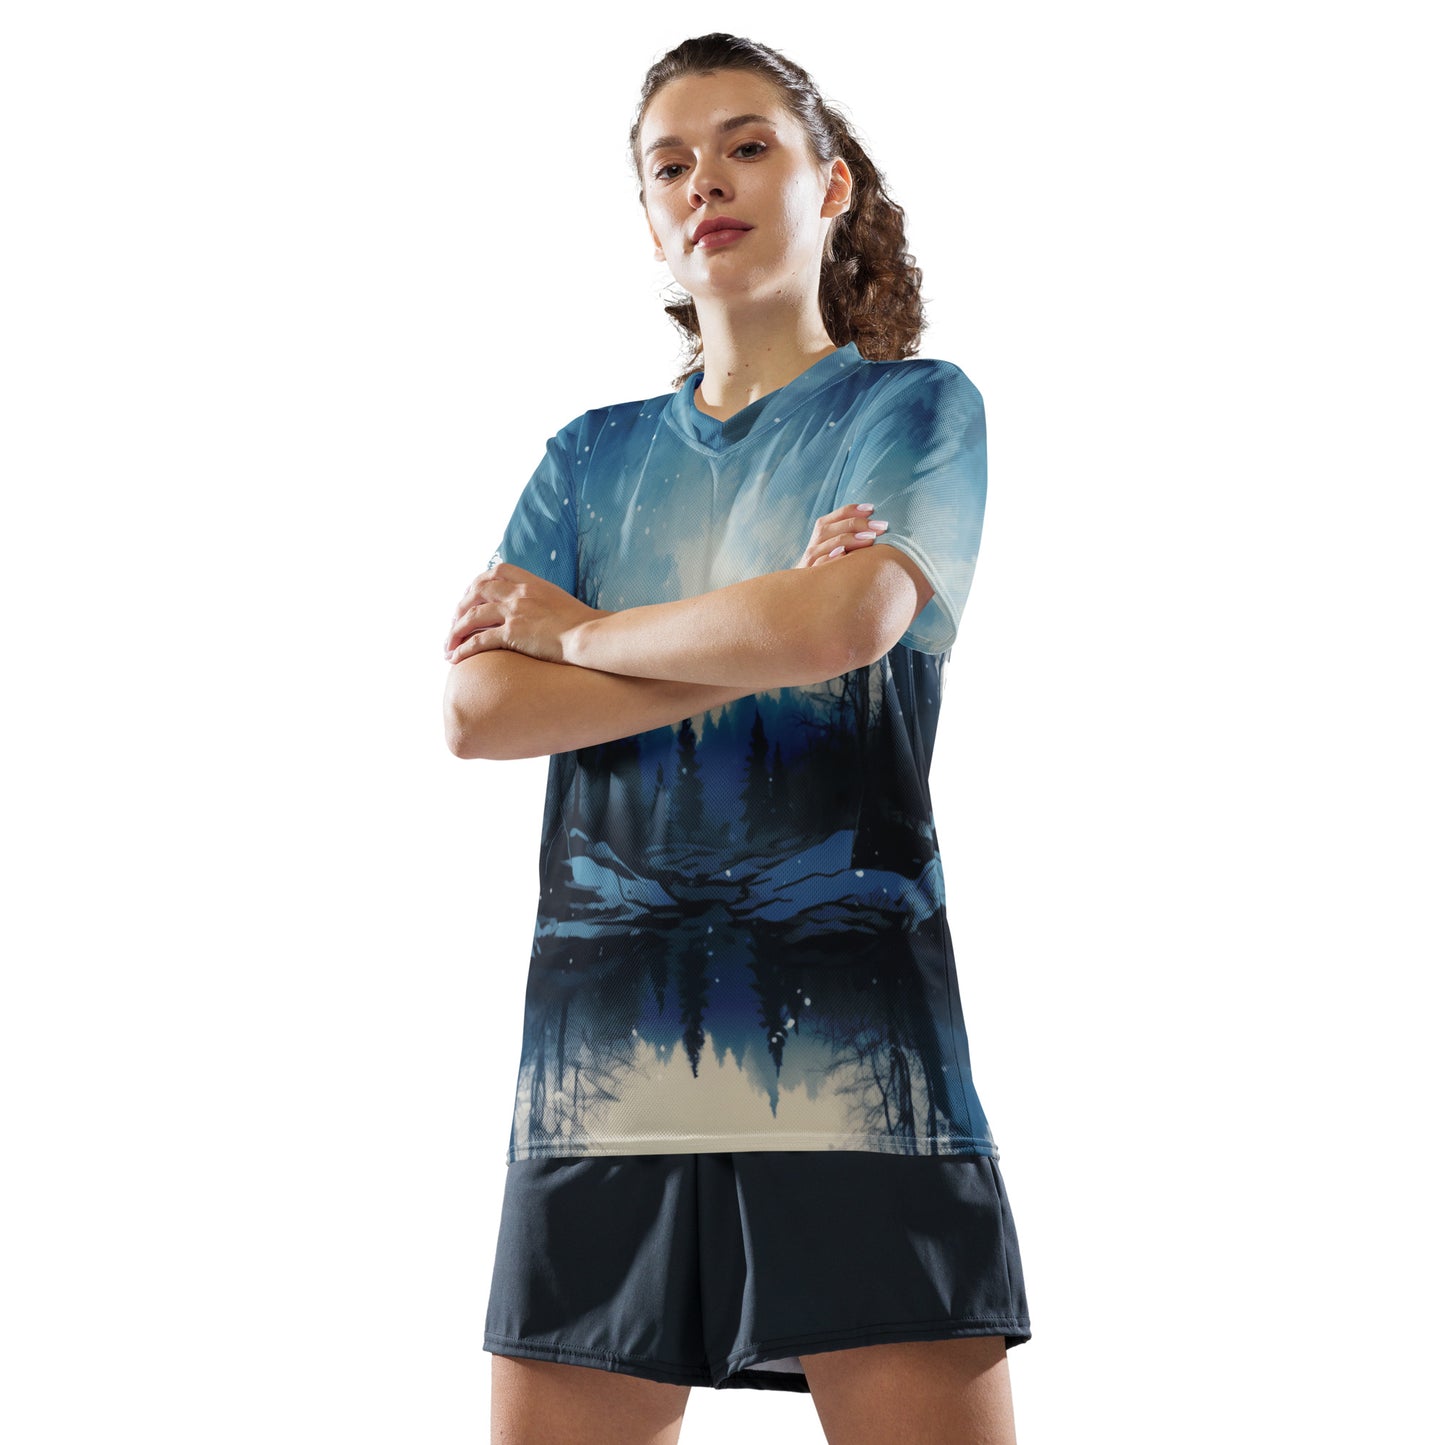 PLT All over Recycled unisex sports jersey